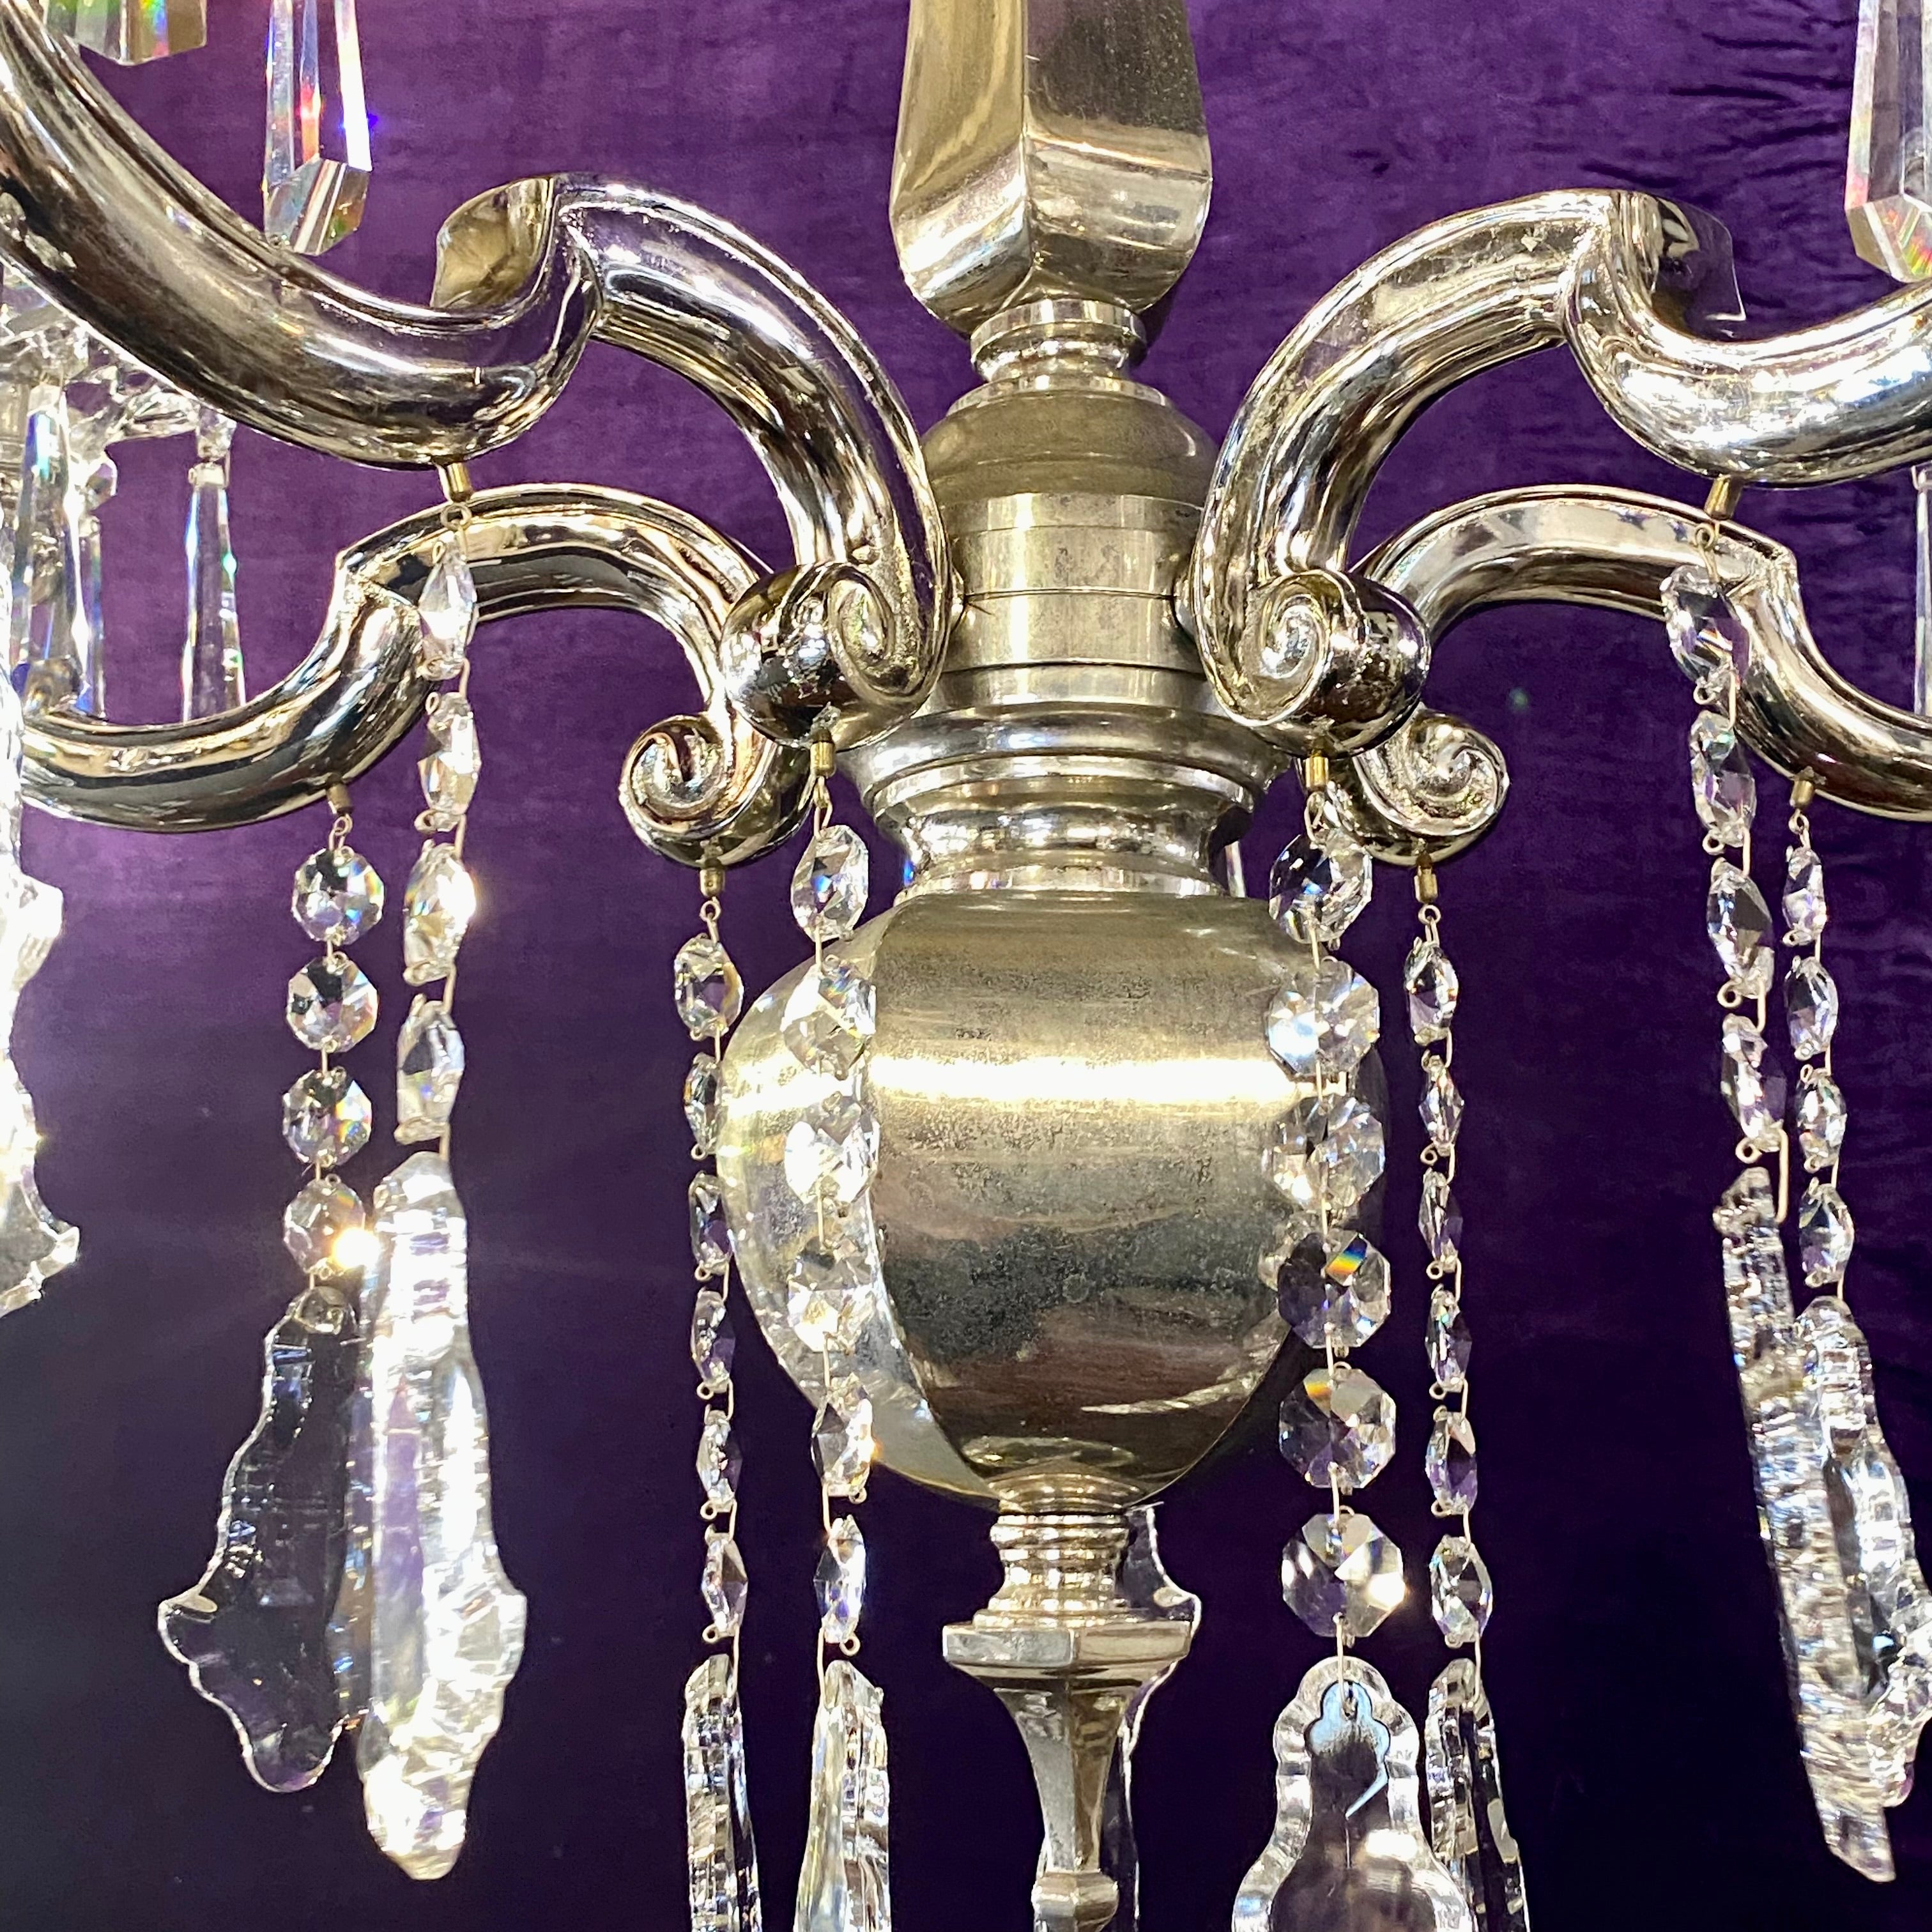 Antique French Nickel Chandelier with Crystal Drops